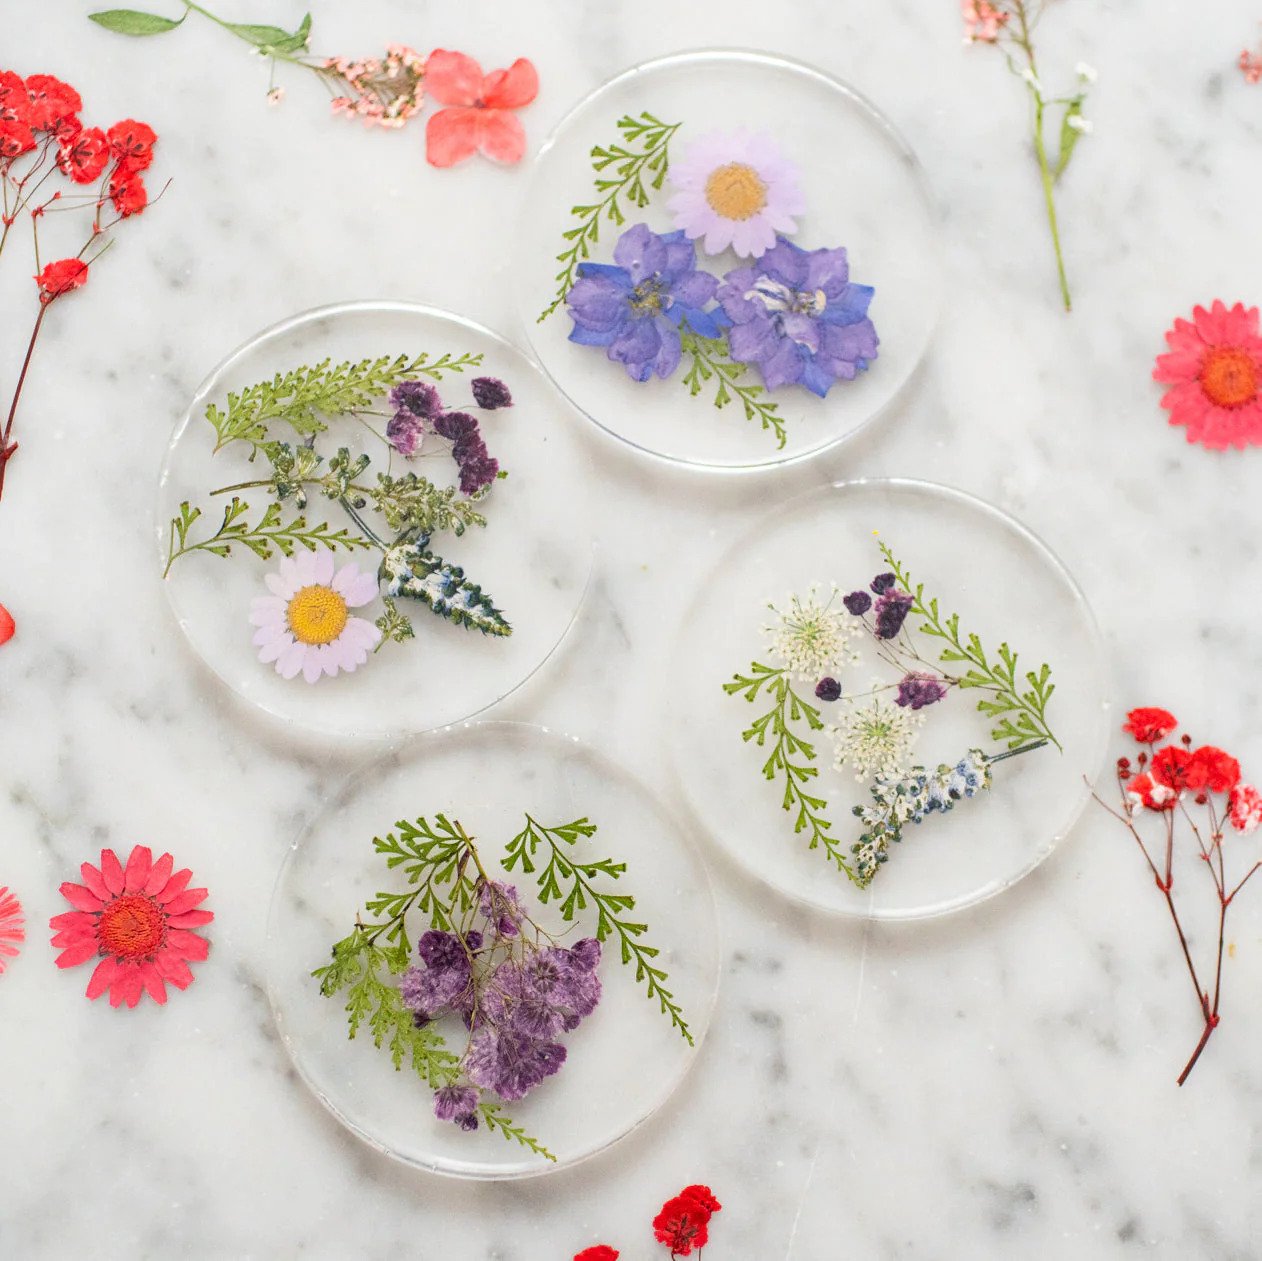 How To Make Flower Resin Coasters